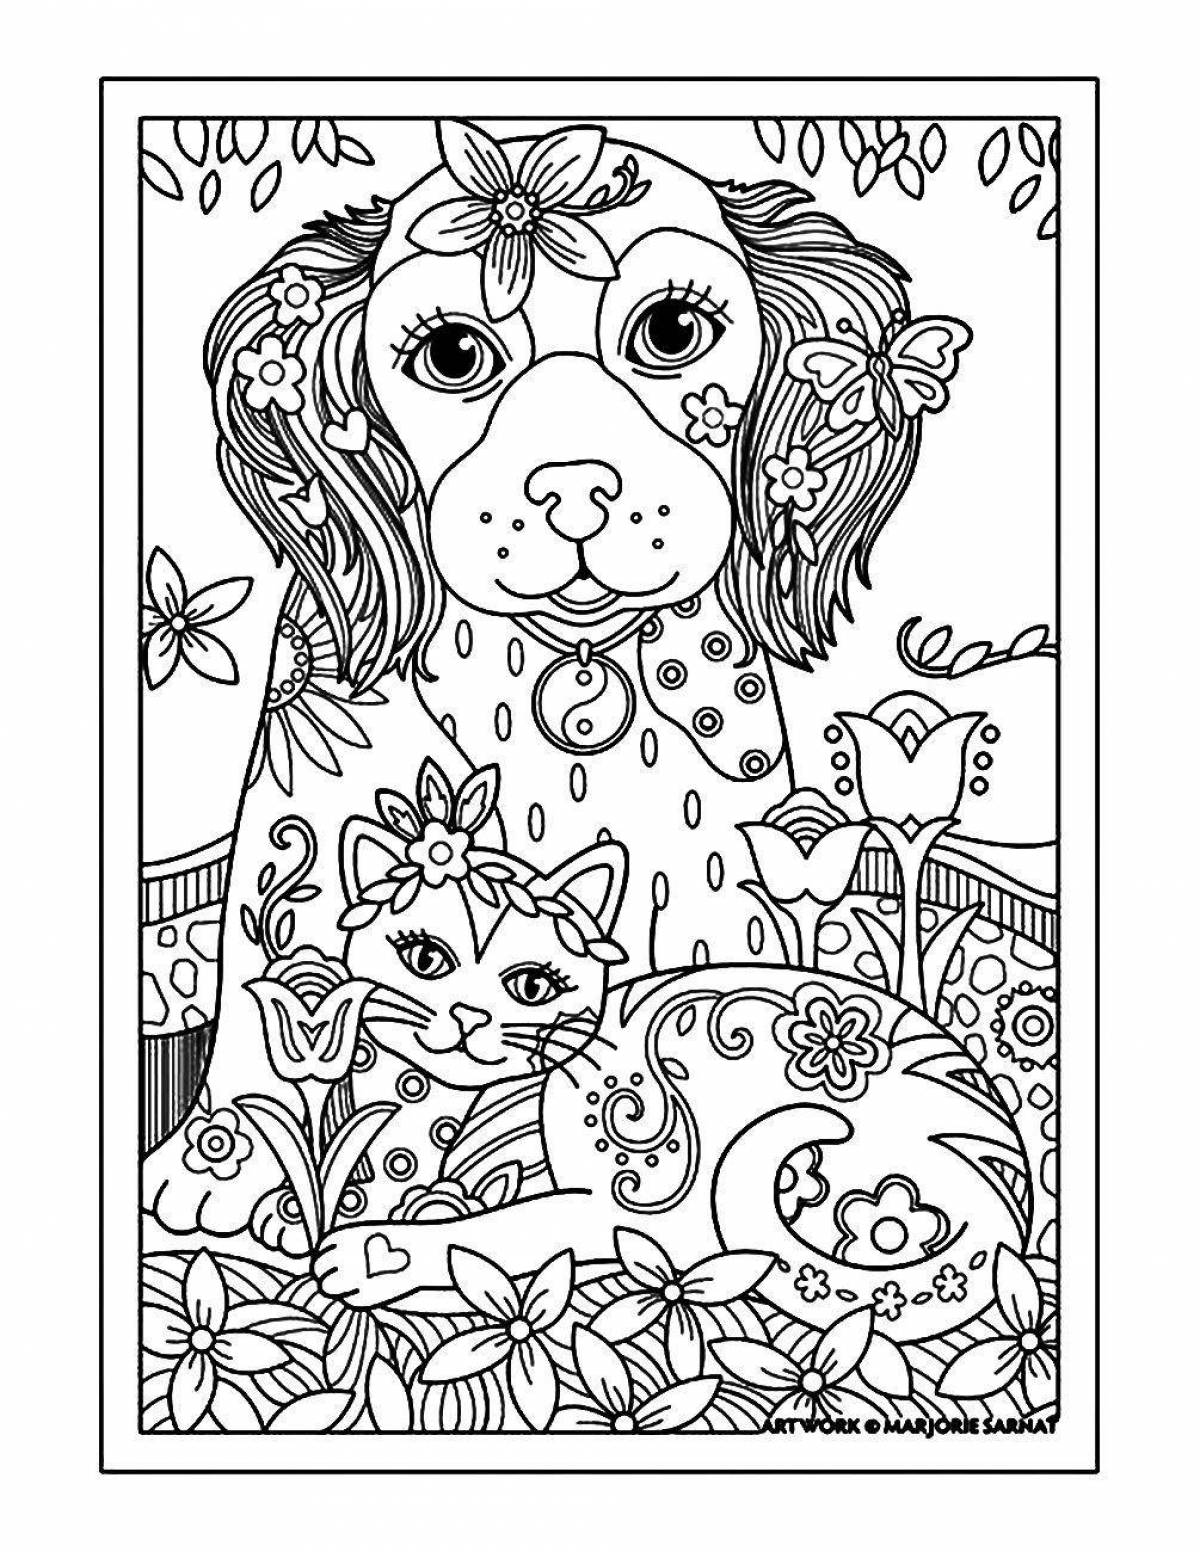 Cute cat and puppy coloring book